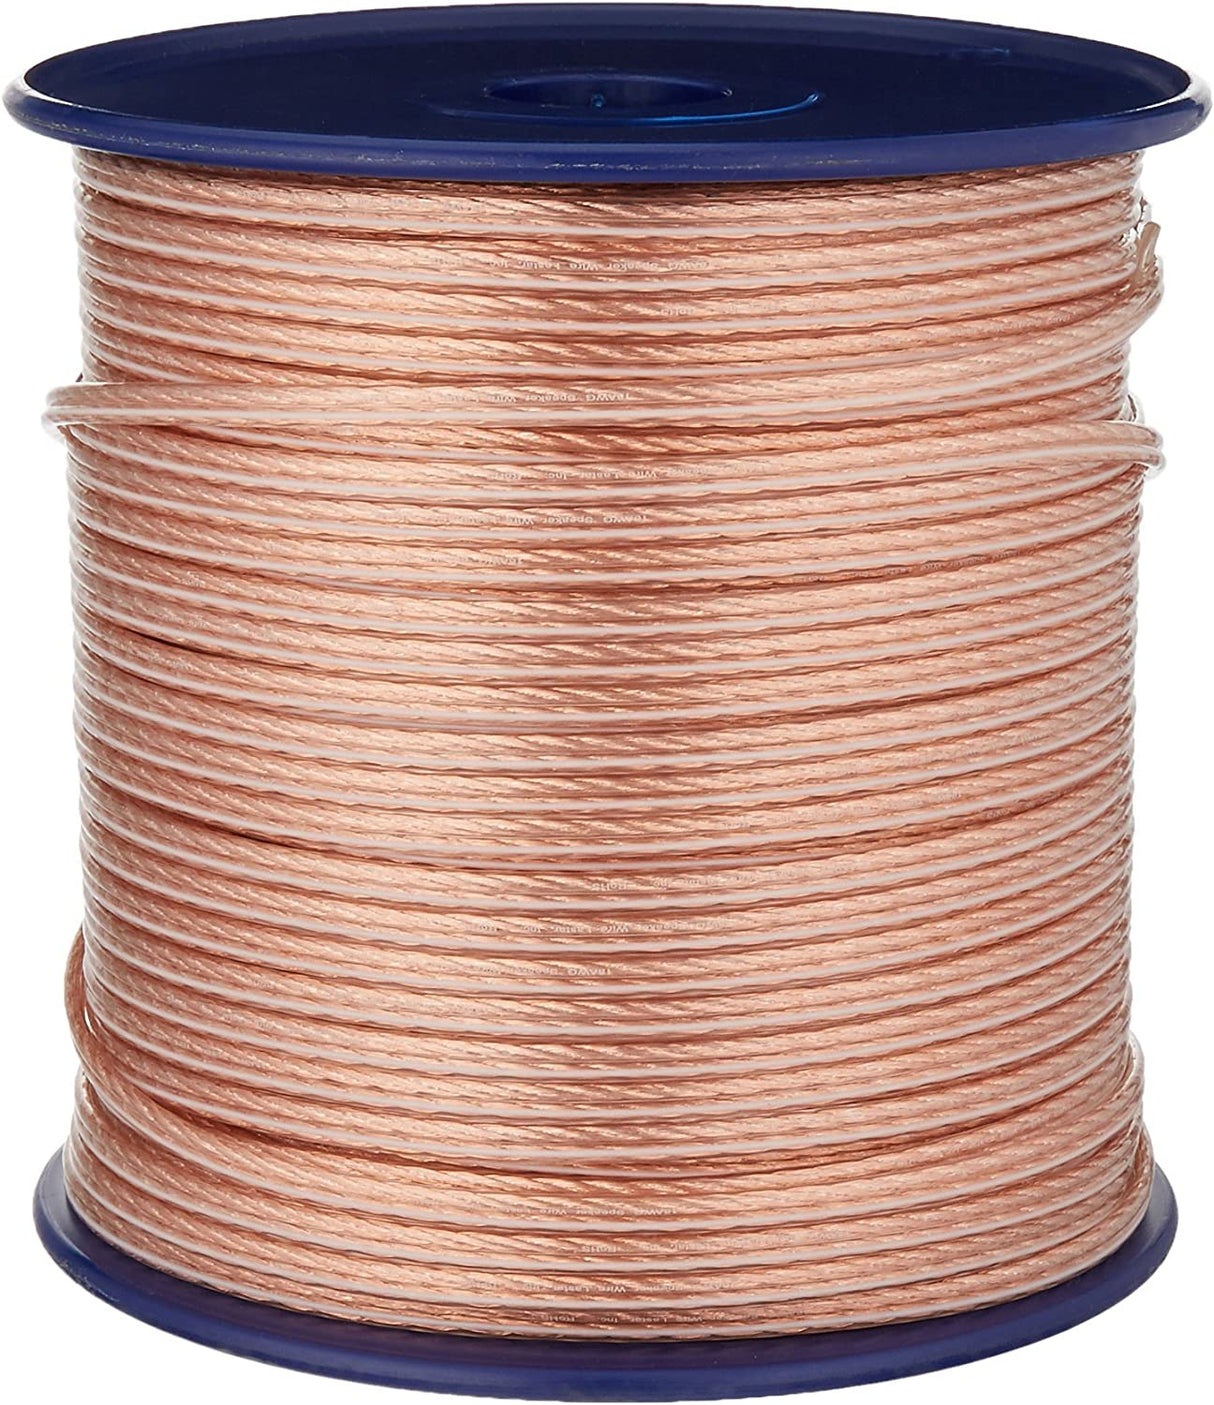 C2g/ cables to go C2G 40532 18 AWG Bulk Speaker Wire, Clear Jacket (500 Feet, 152.4 Meters)